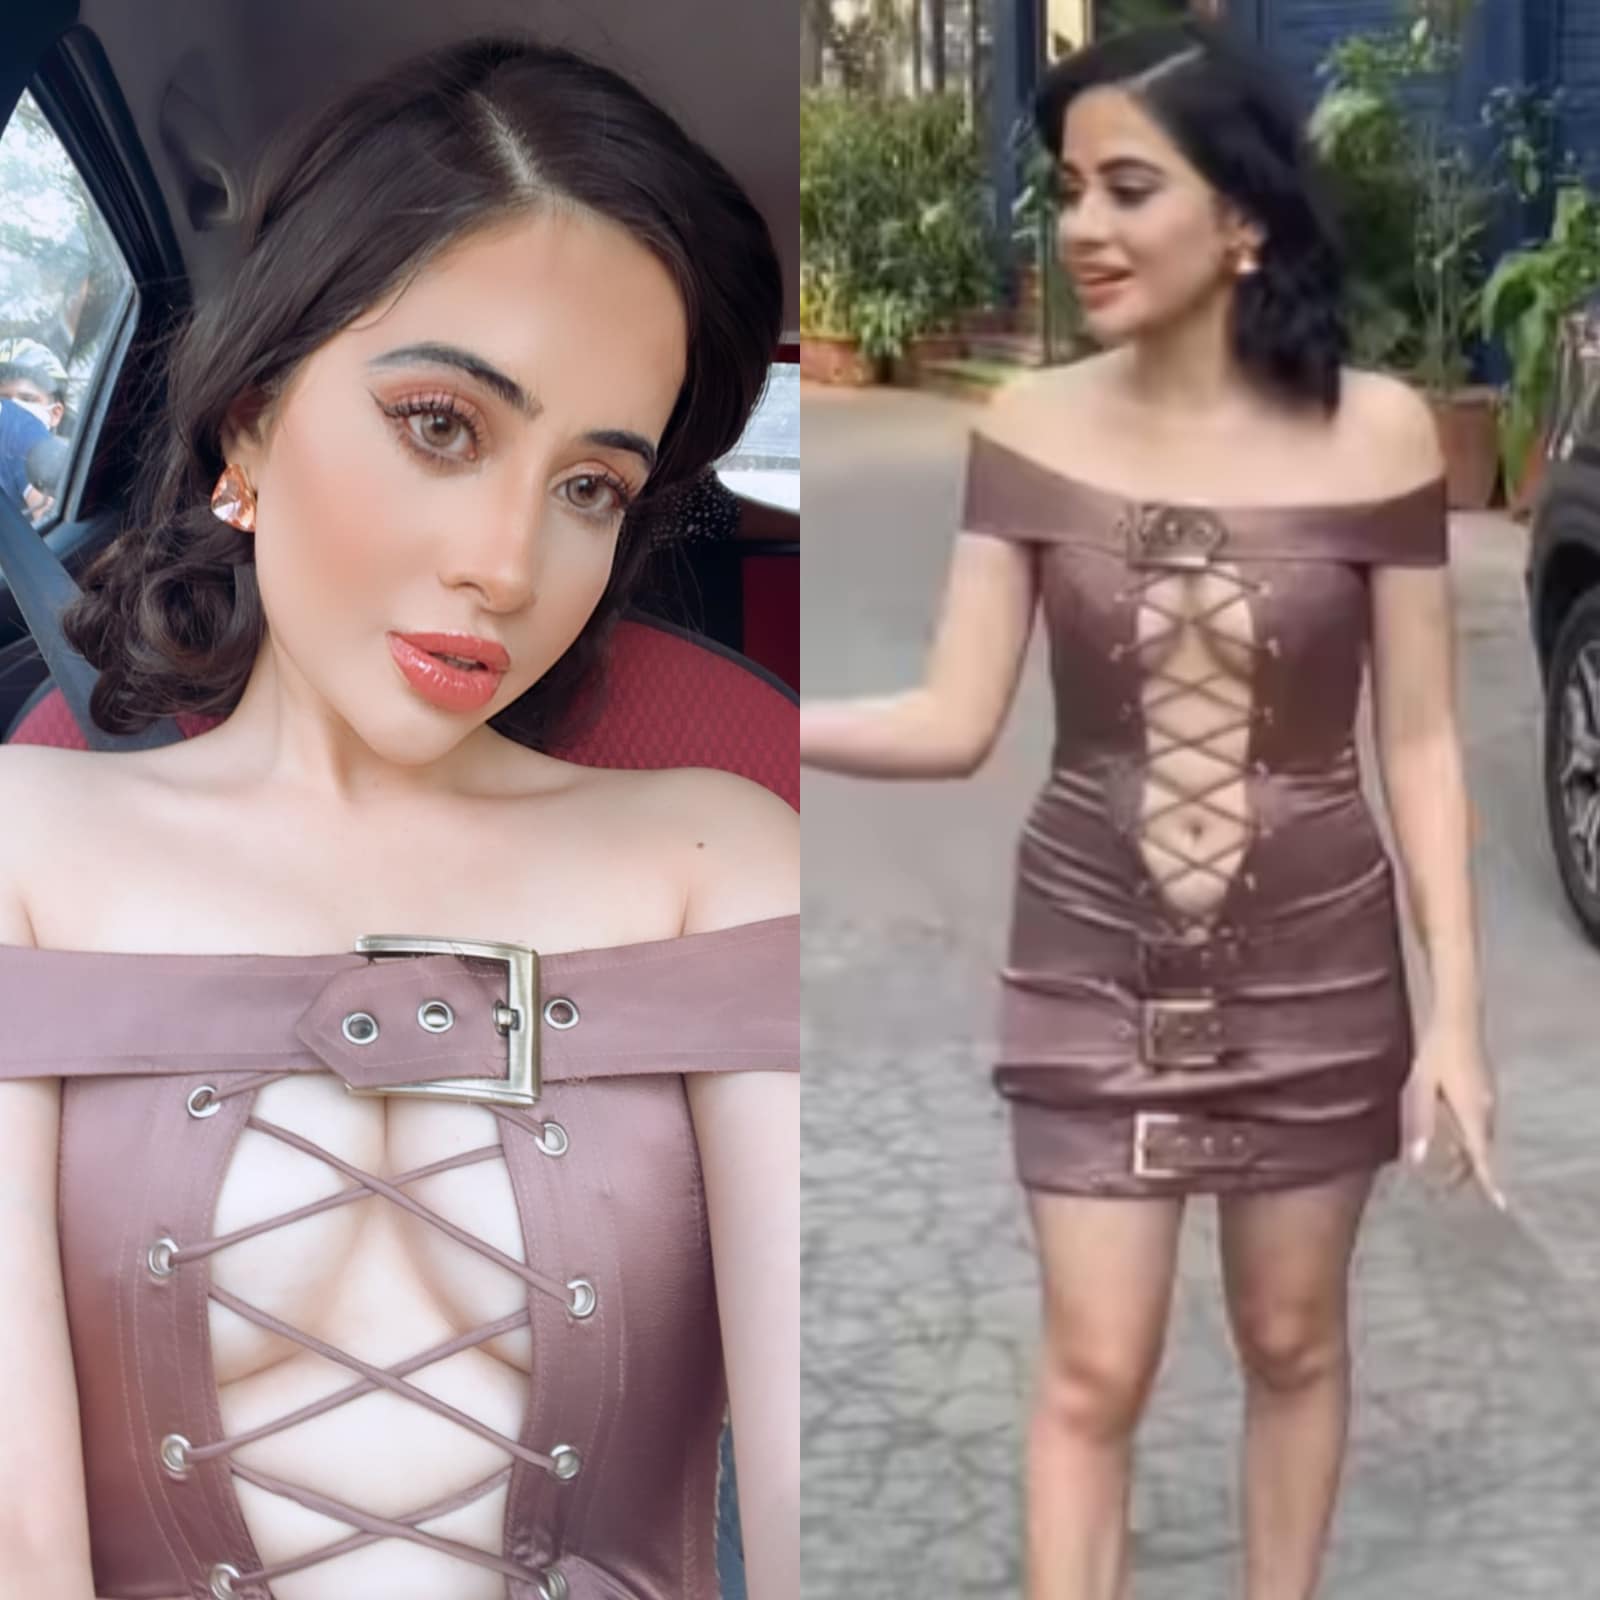 Urfi Javed's dress made up of 'safety pins' creates buzz on internet | WATCH